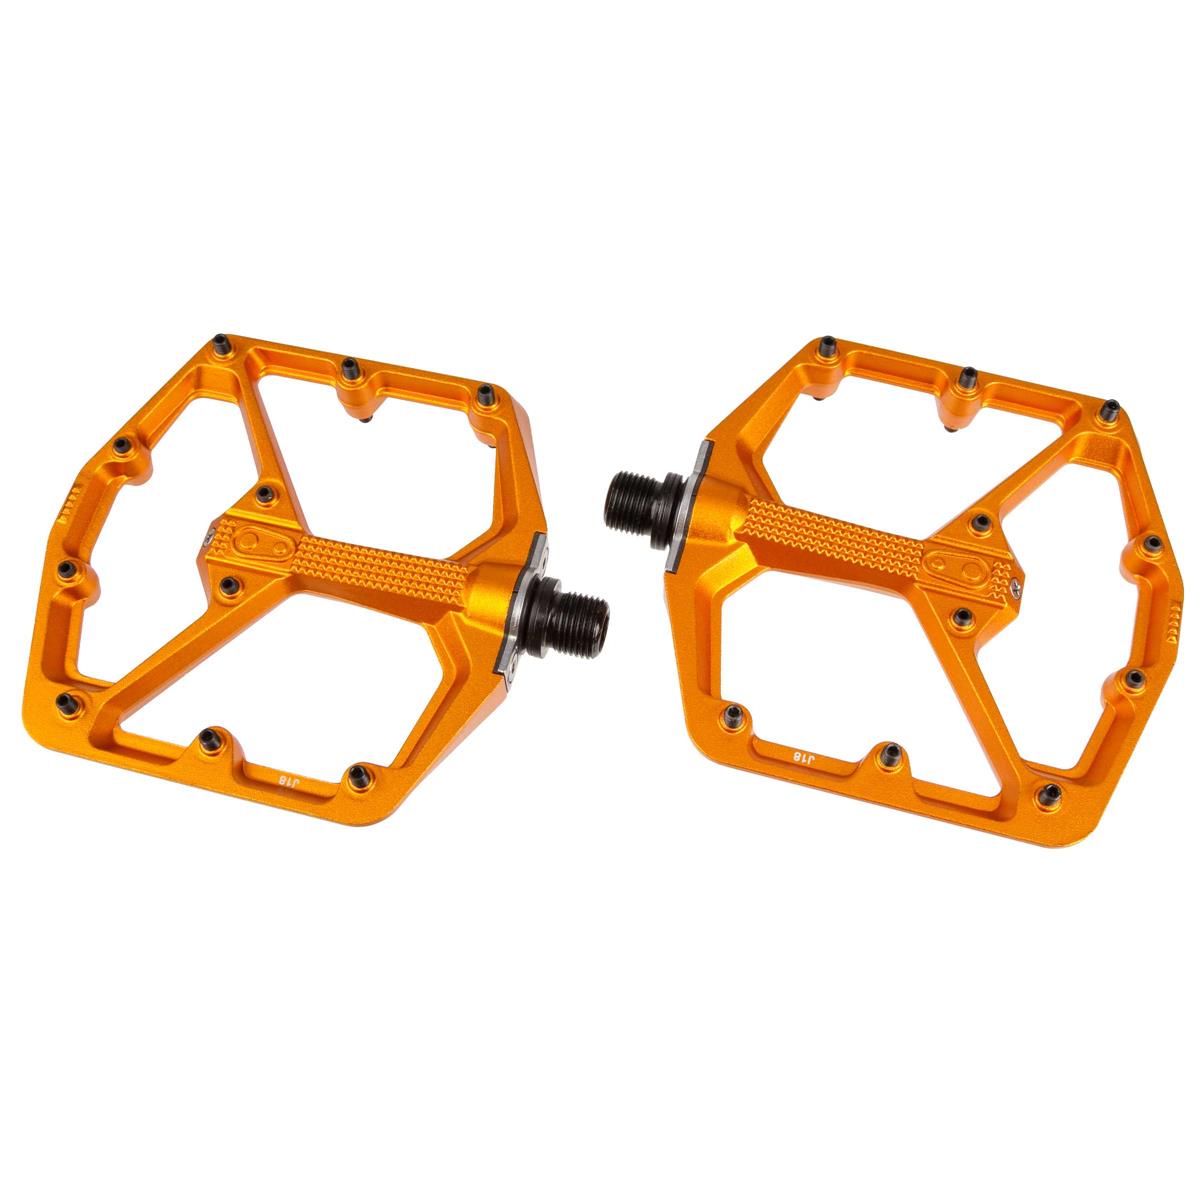 CRANKBROTHERS Pedals Stamp 7 Large Limited Edition